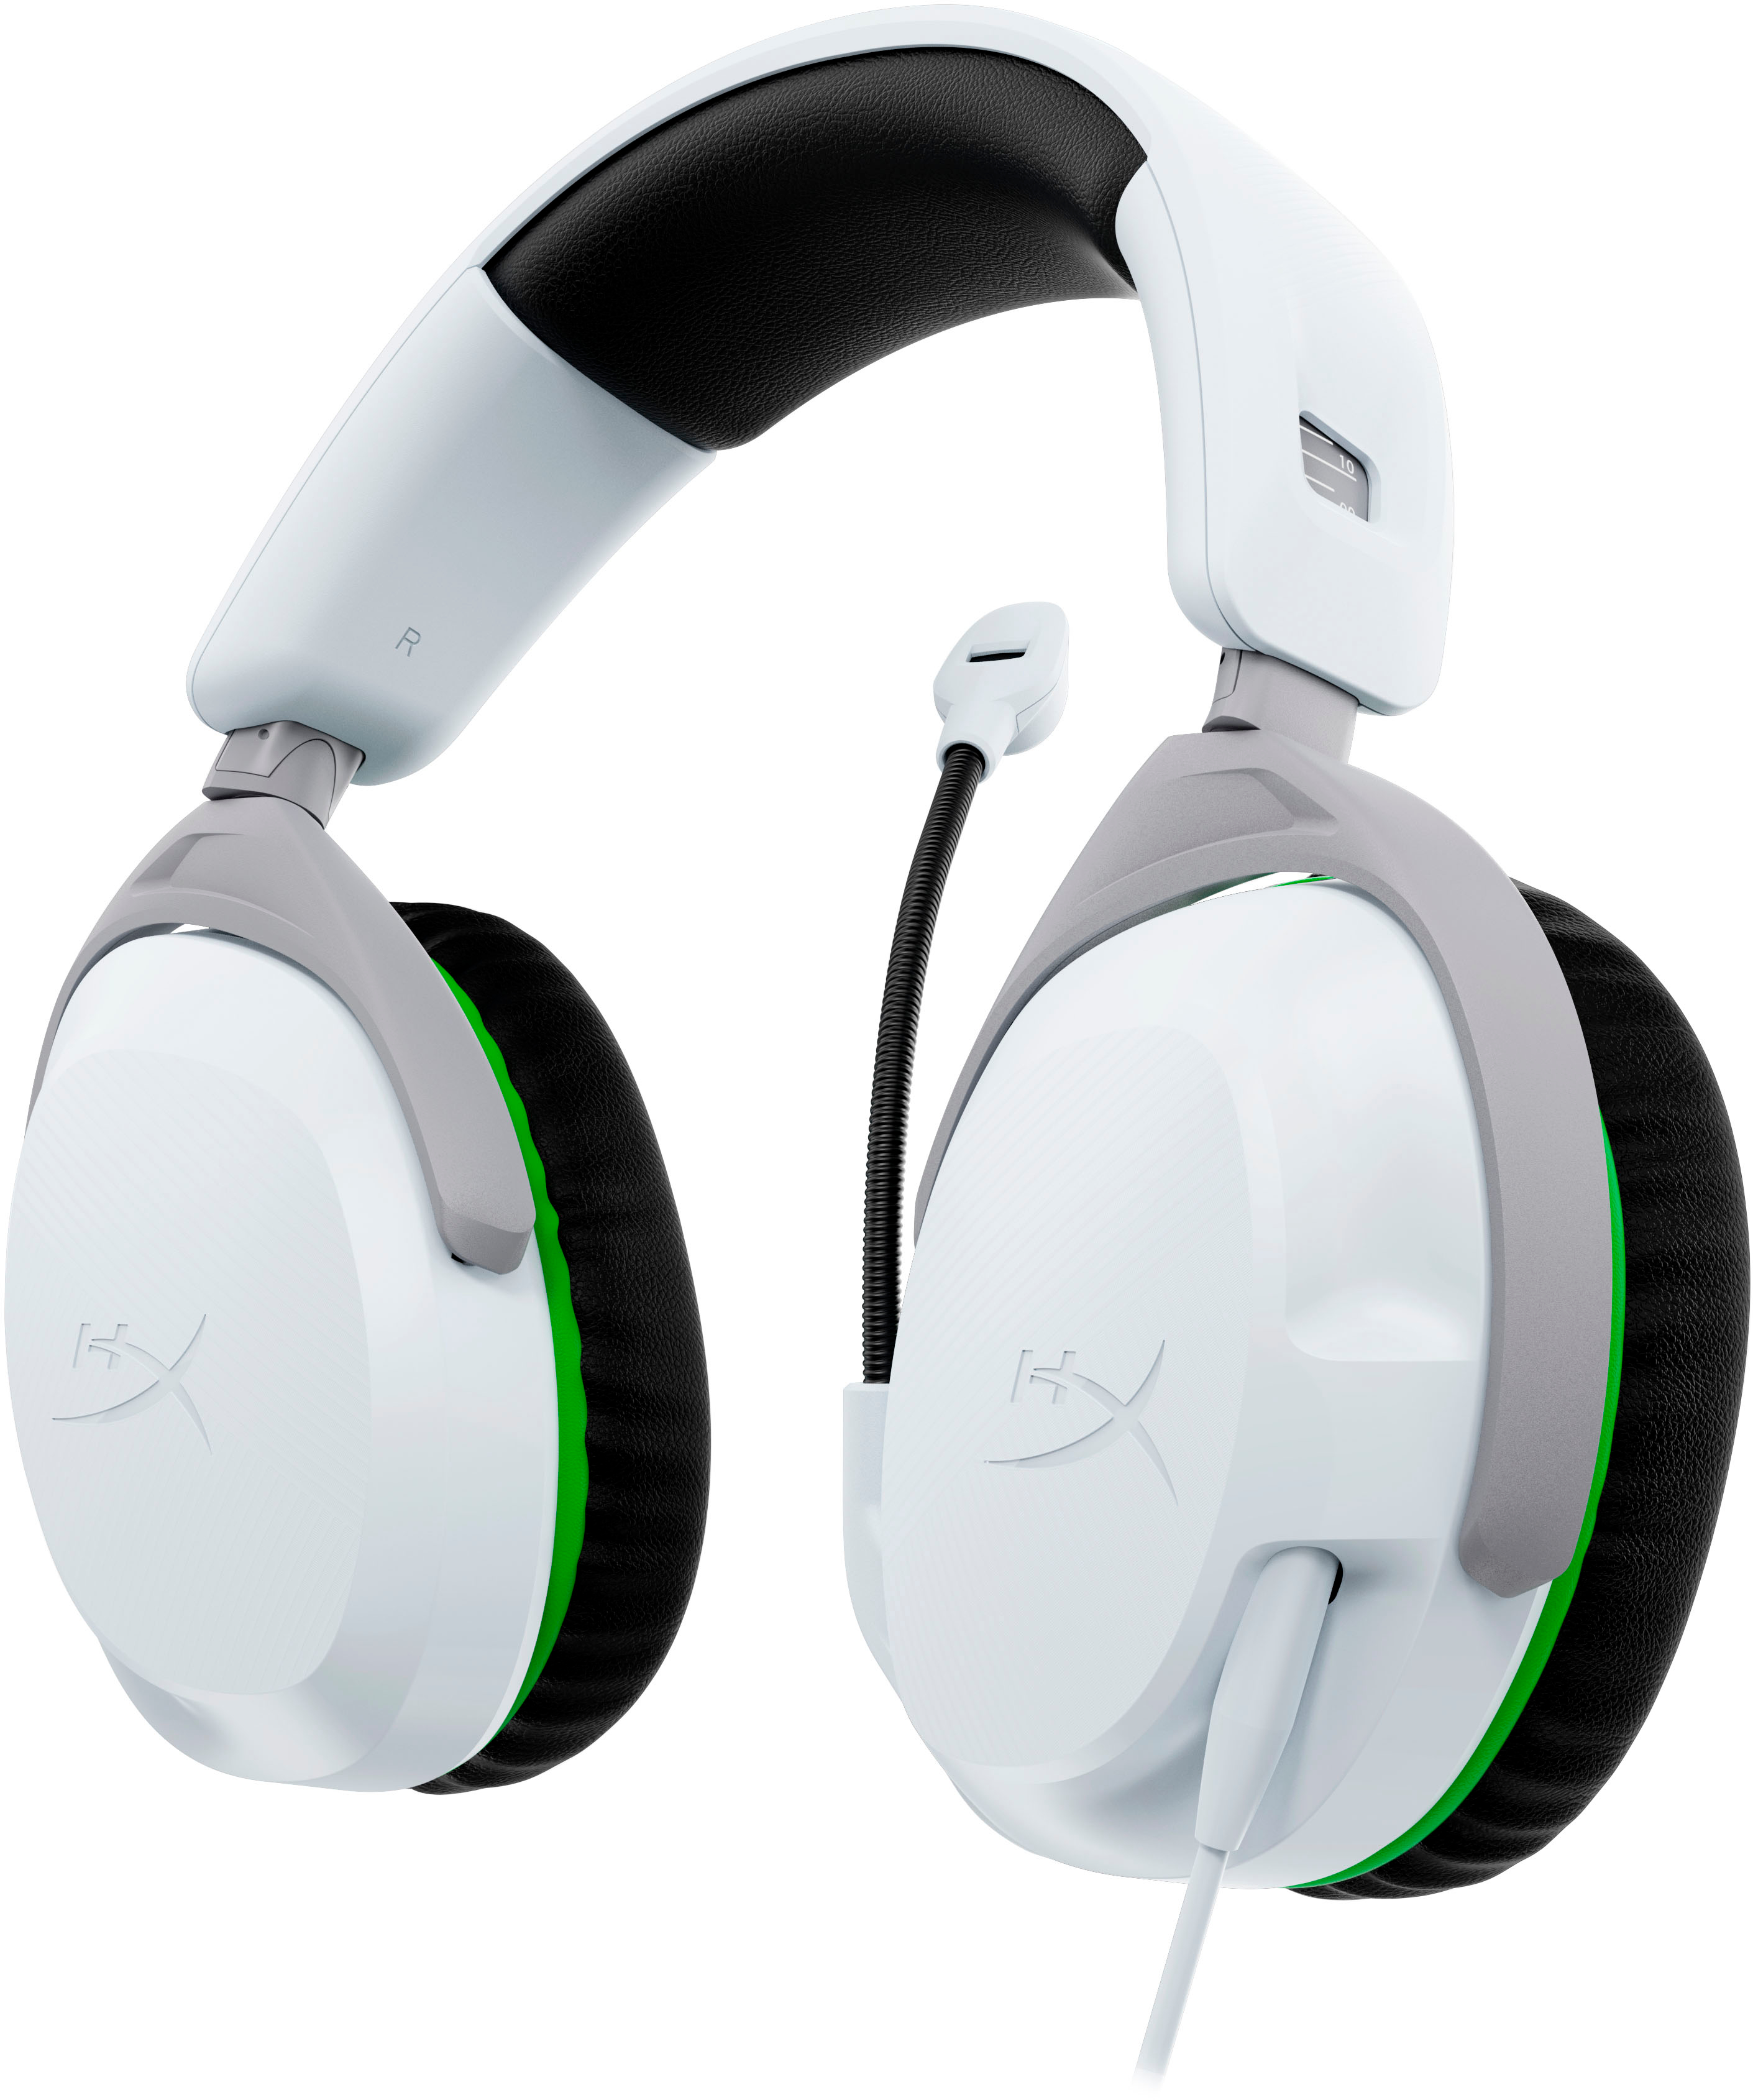 CloudX Wired Buy Xbox HyperX 2 for 75X28AA Best Gaming White Stinger Headset -